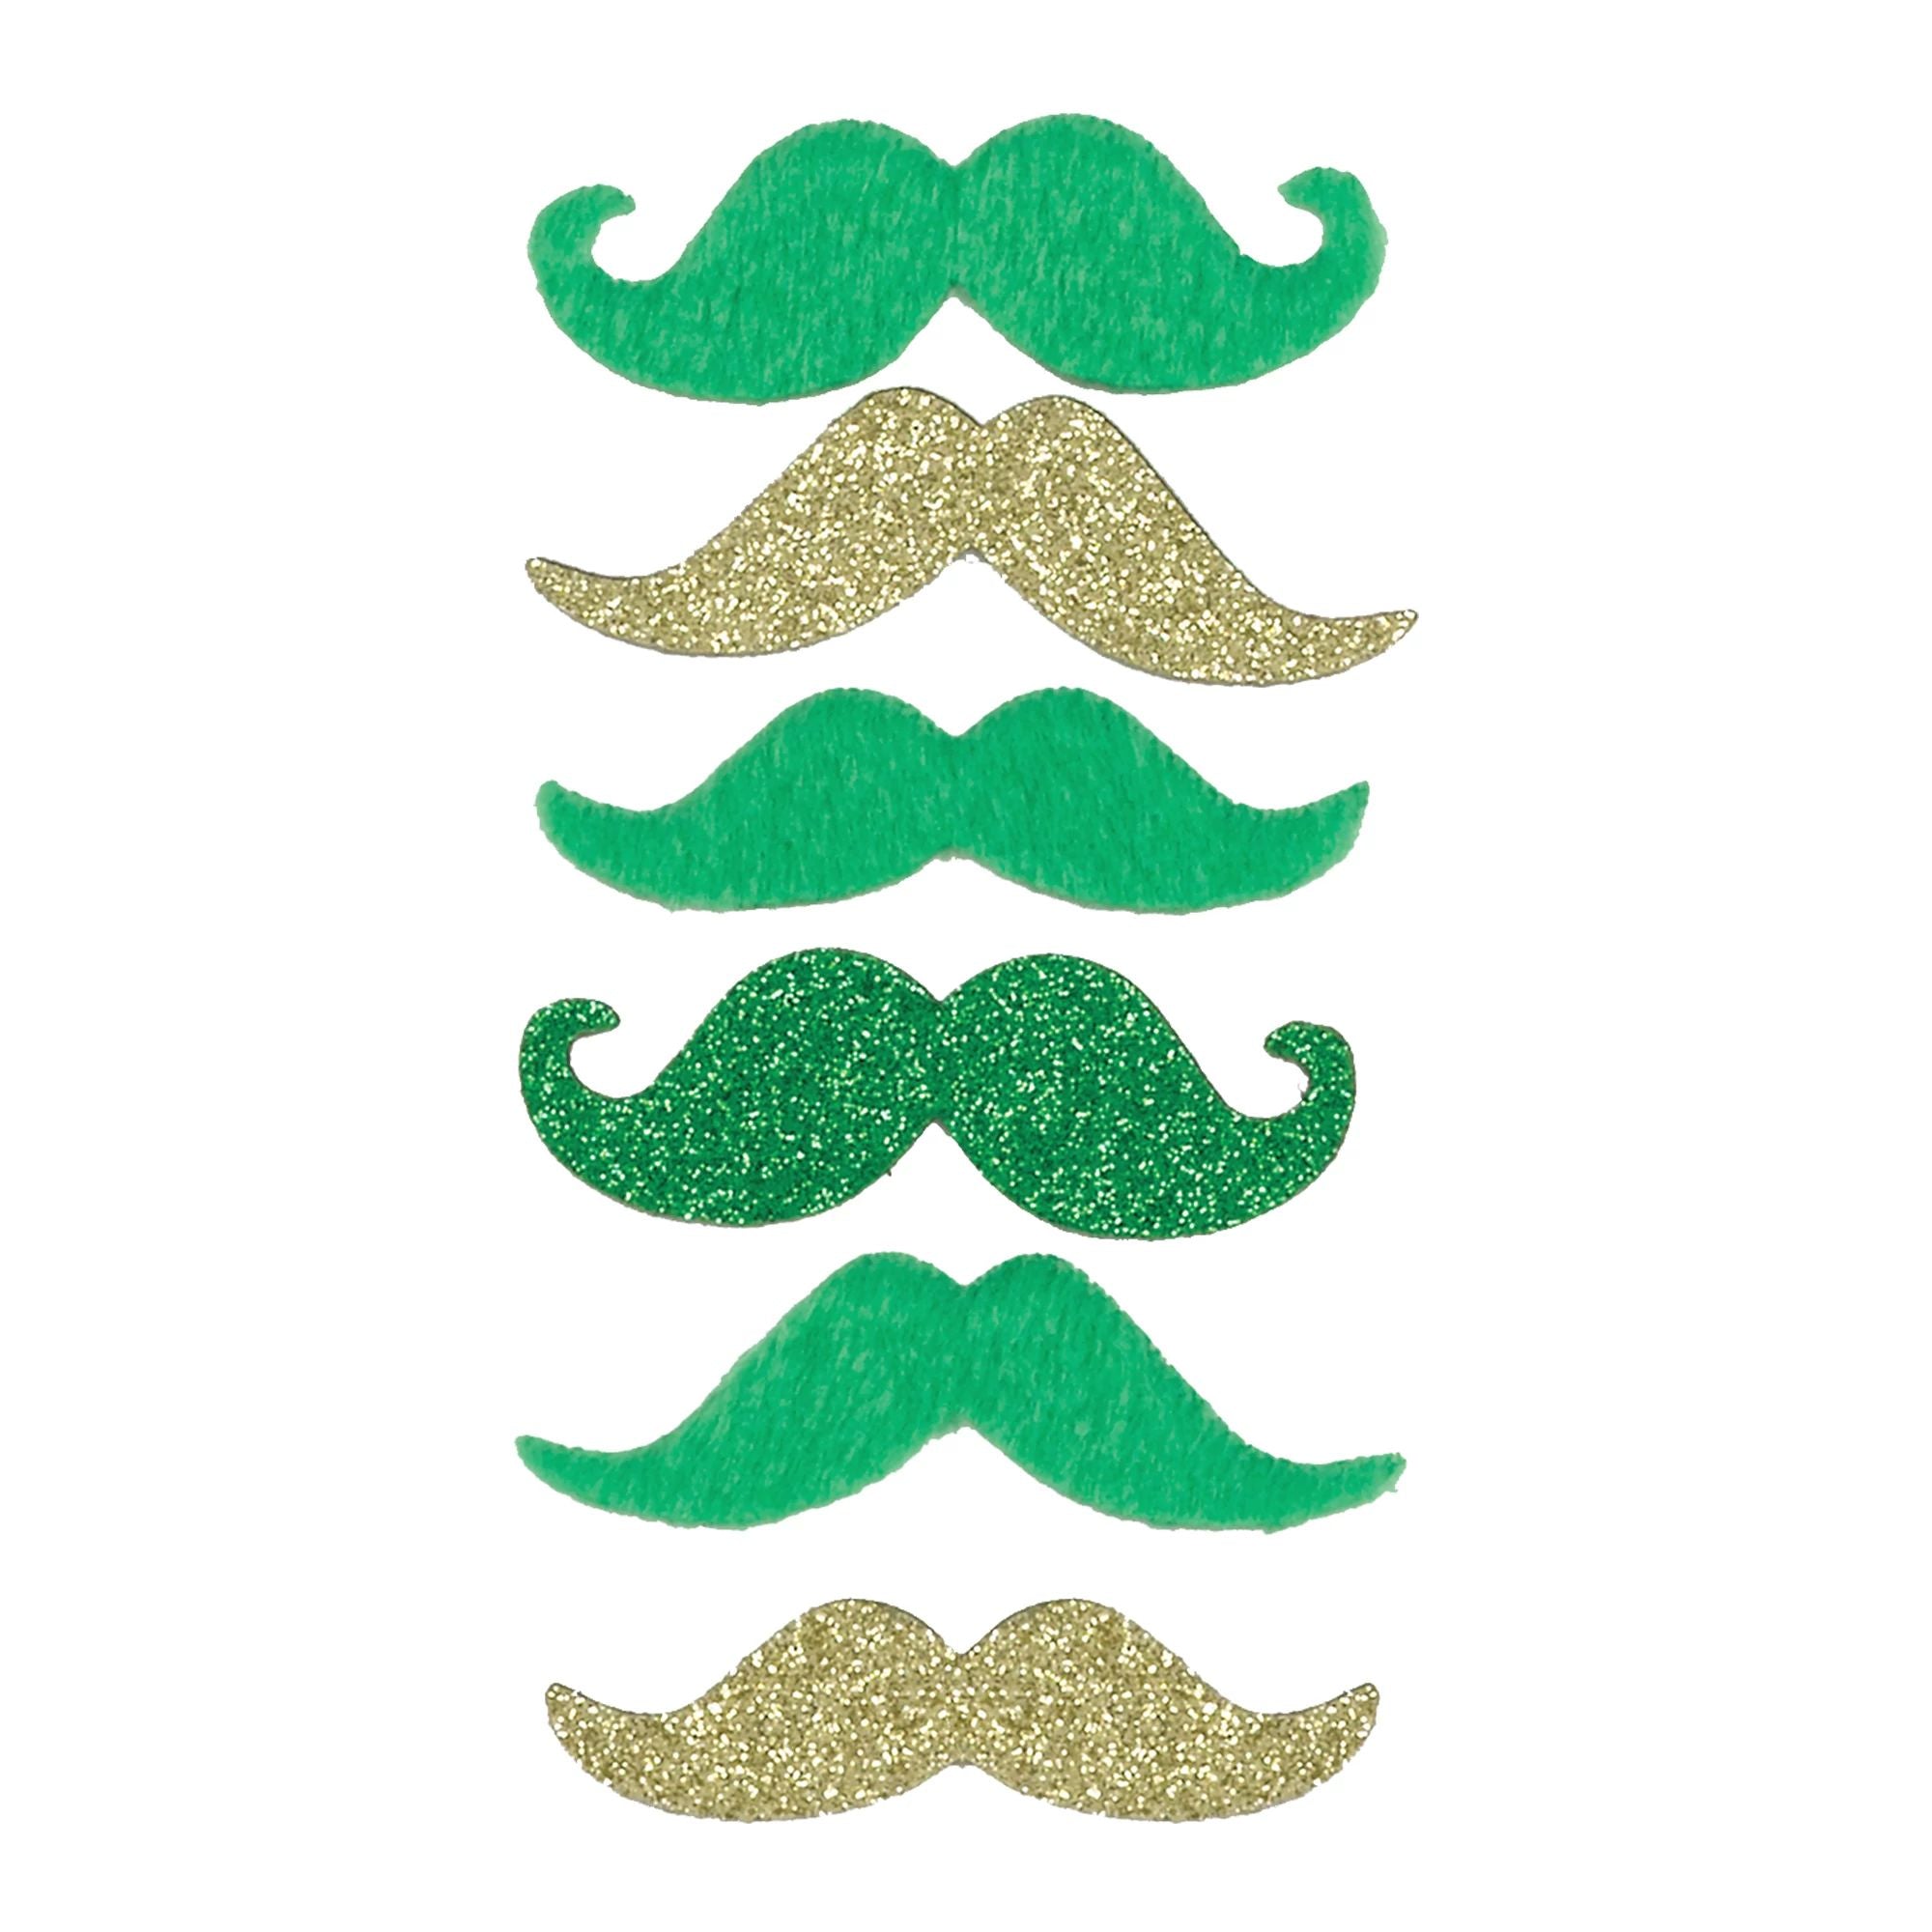 Amscan HOLIDAY: ST. PAT'S St. Patrick's Day Moustaches Novelty Pack